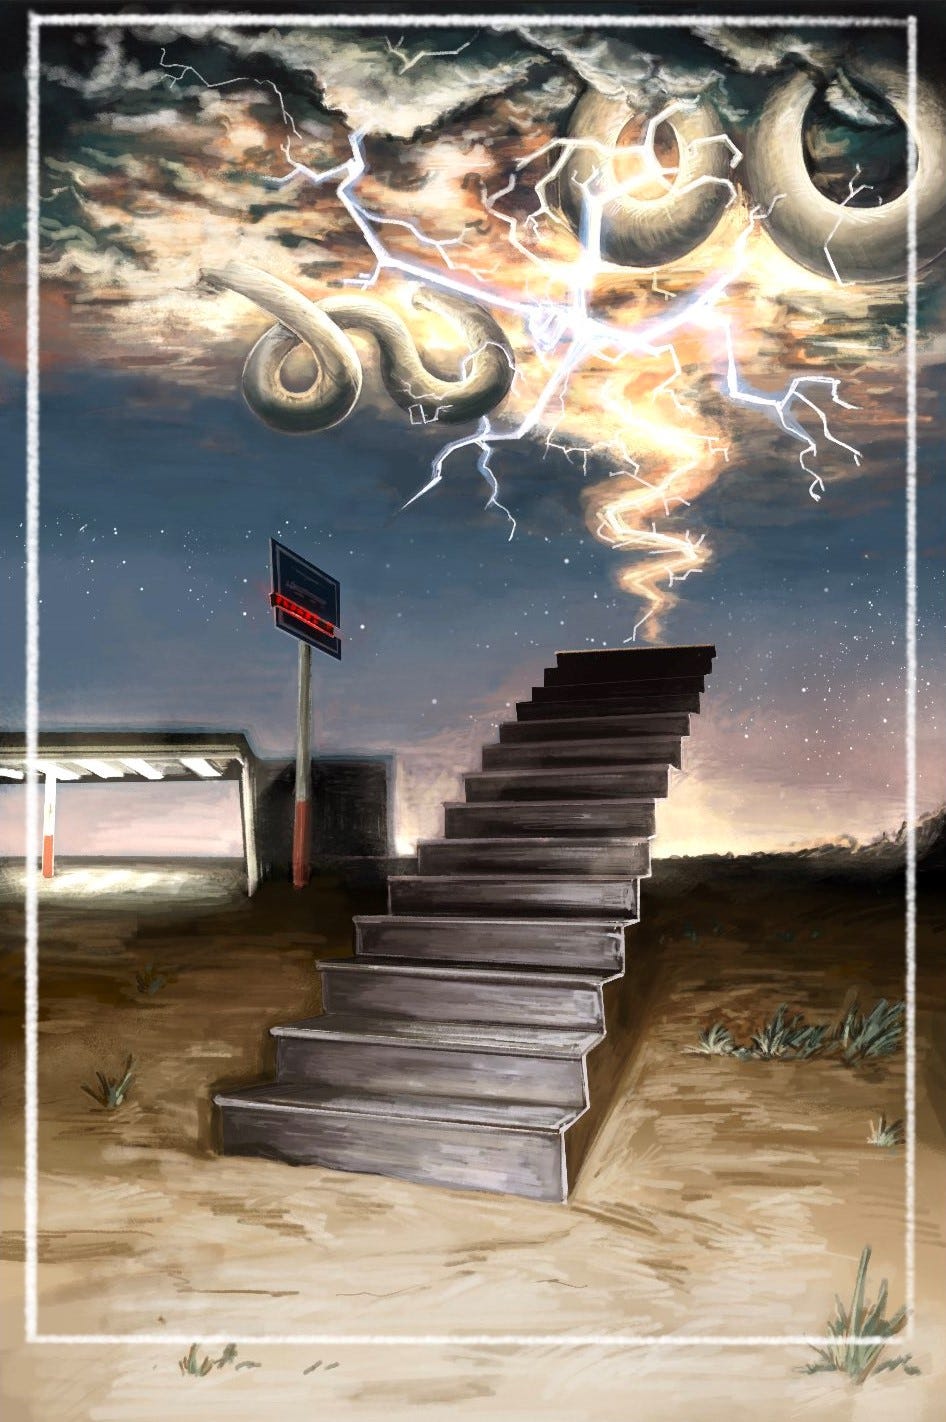 Concept Art for the Backrooms-inspired game. It depicts a stairwell that  seemingly leads to nowhere and an empty gas station off to the side. In the sky above, light flashes and a cloud-like fog roils, with the snake-like limbs of an unknown creature weaving through the clouds